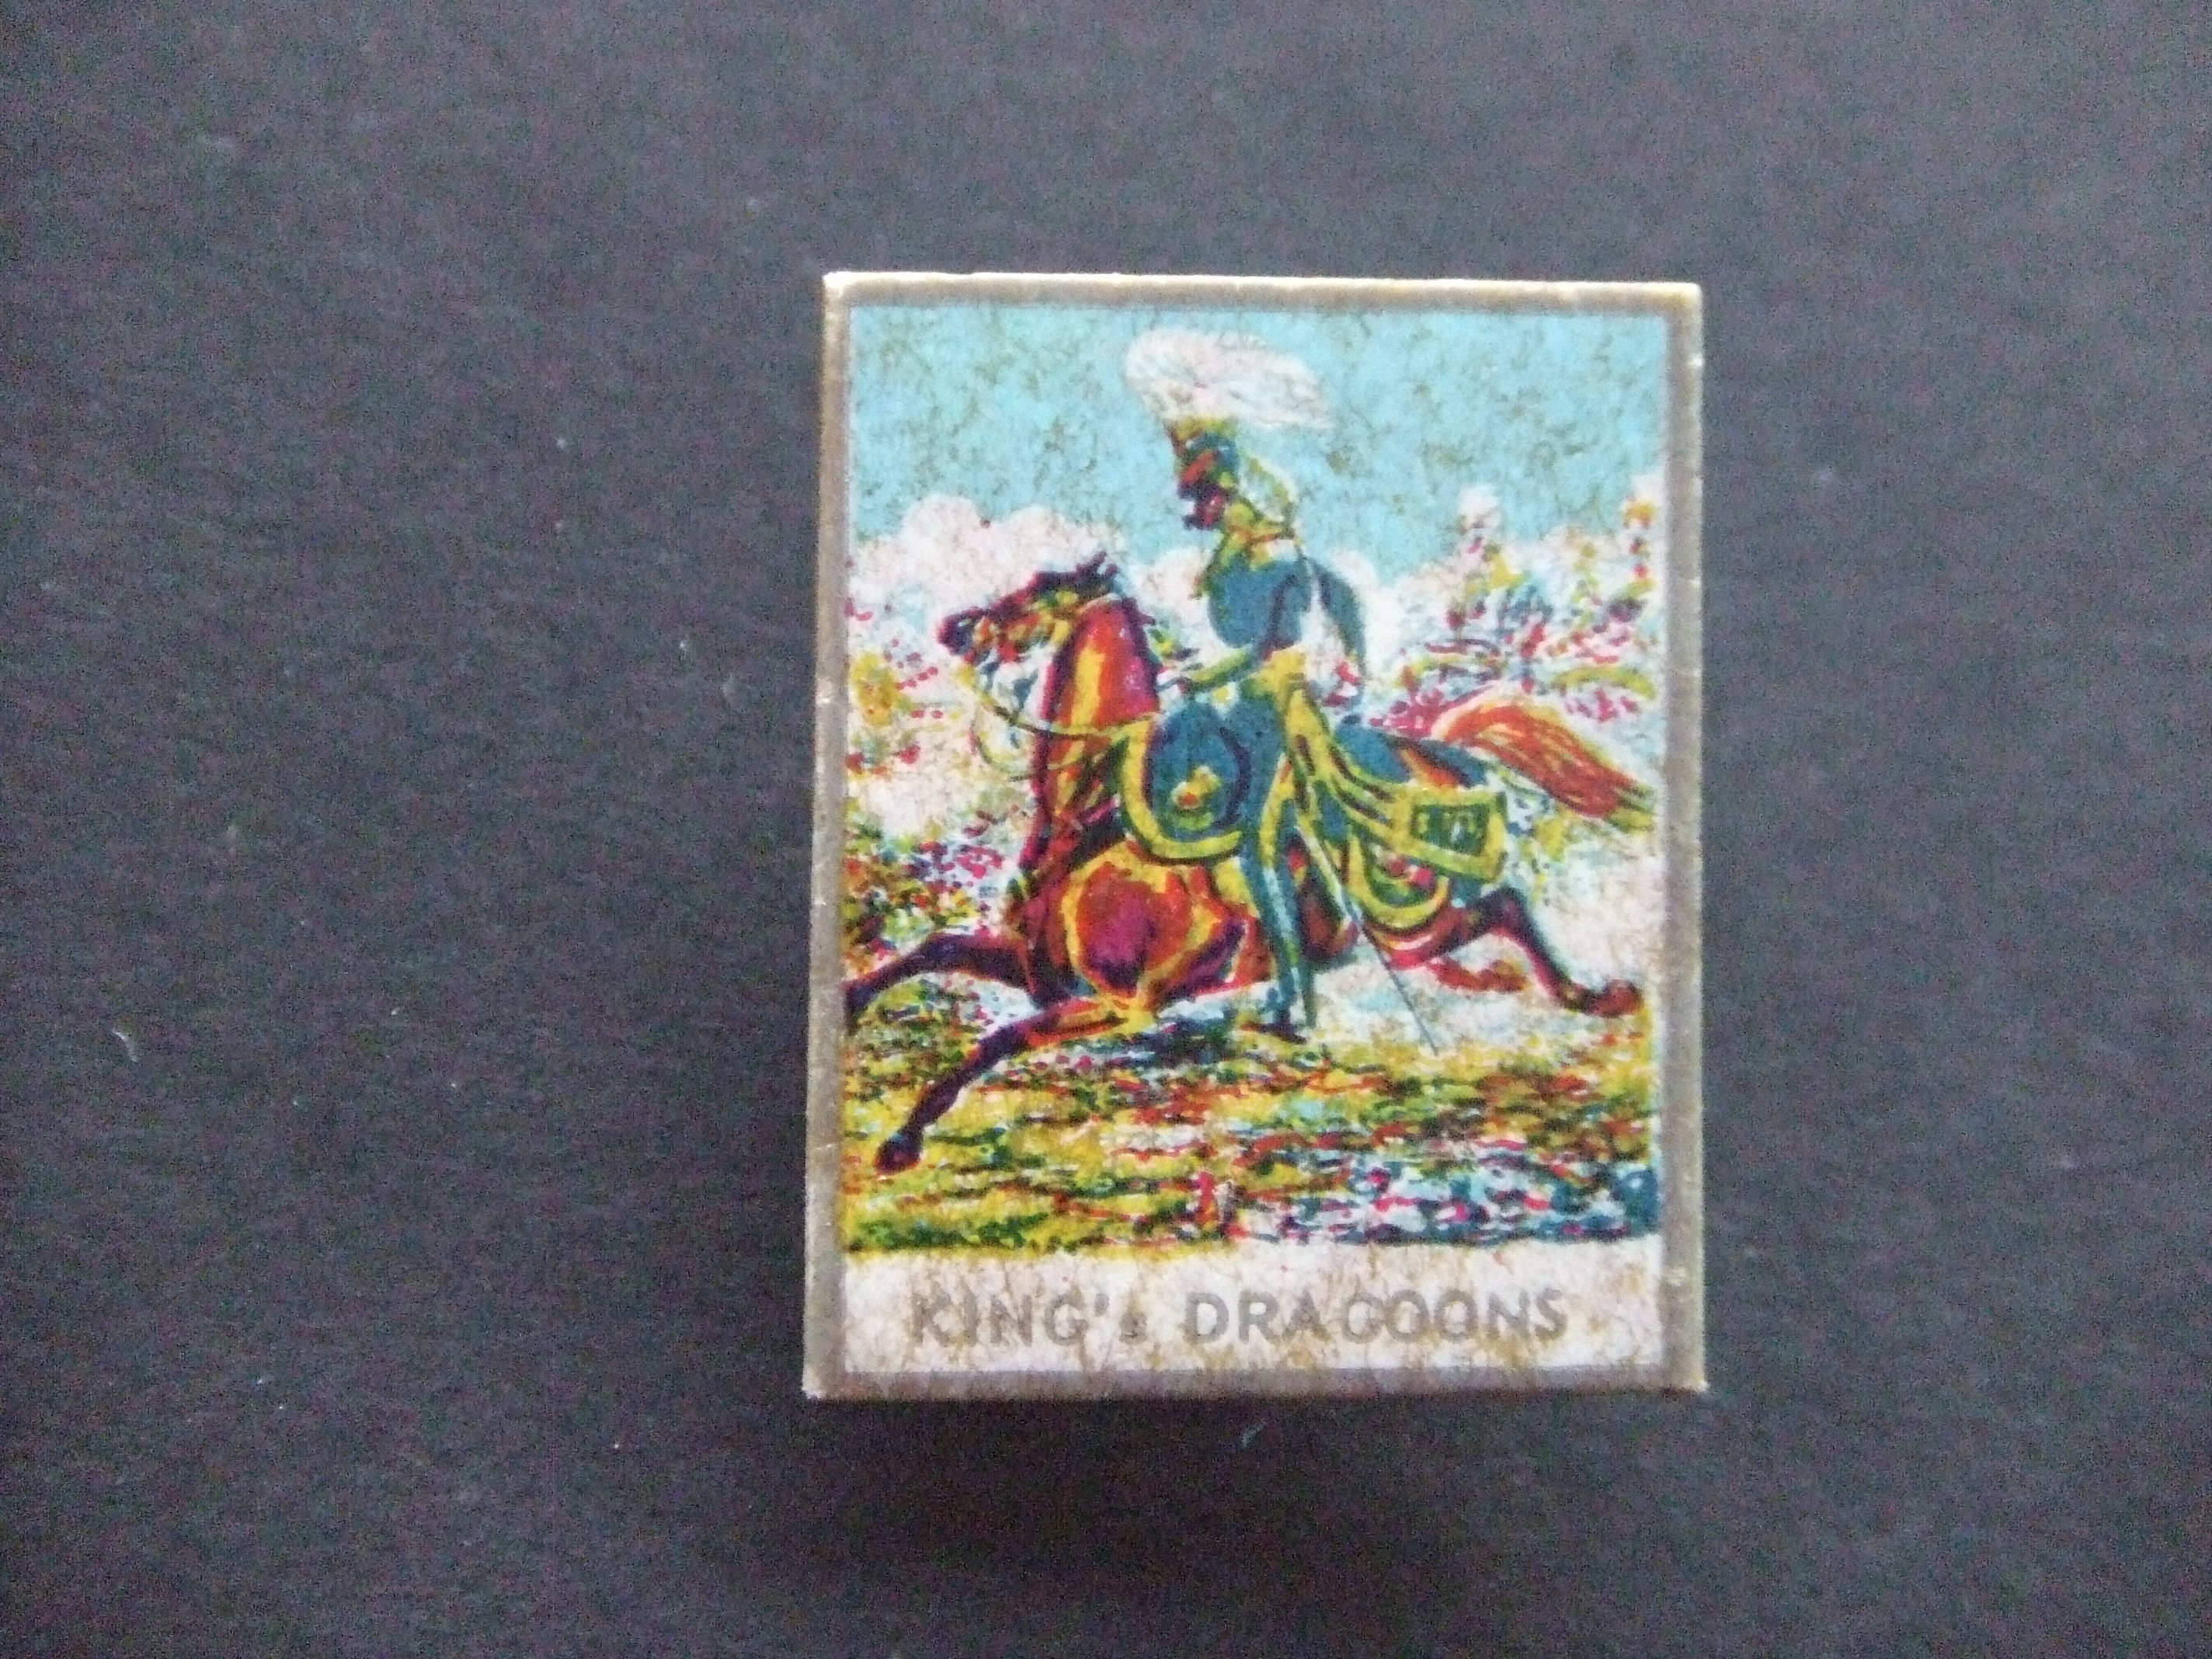 King's Dragoon cavalry regiment in the British Army